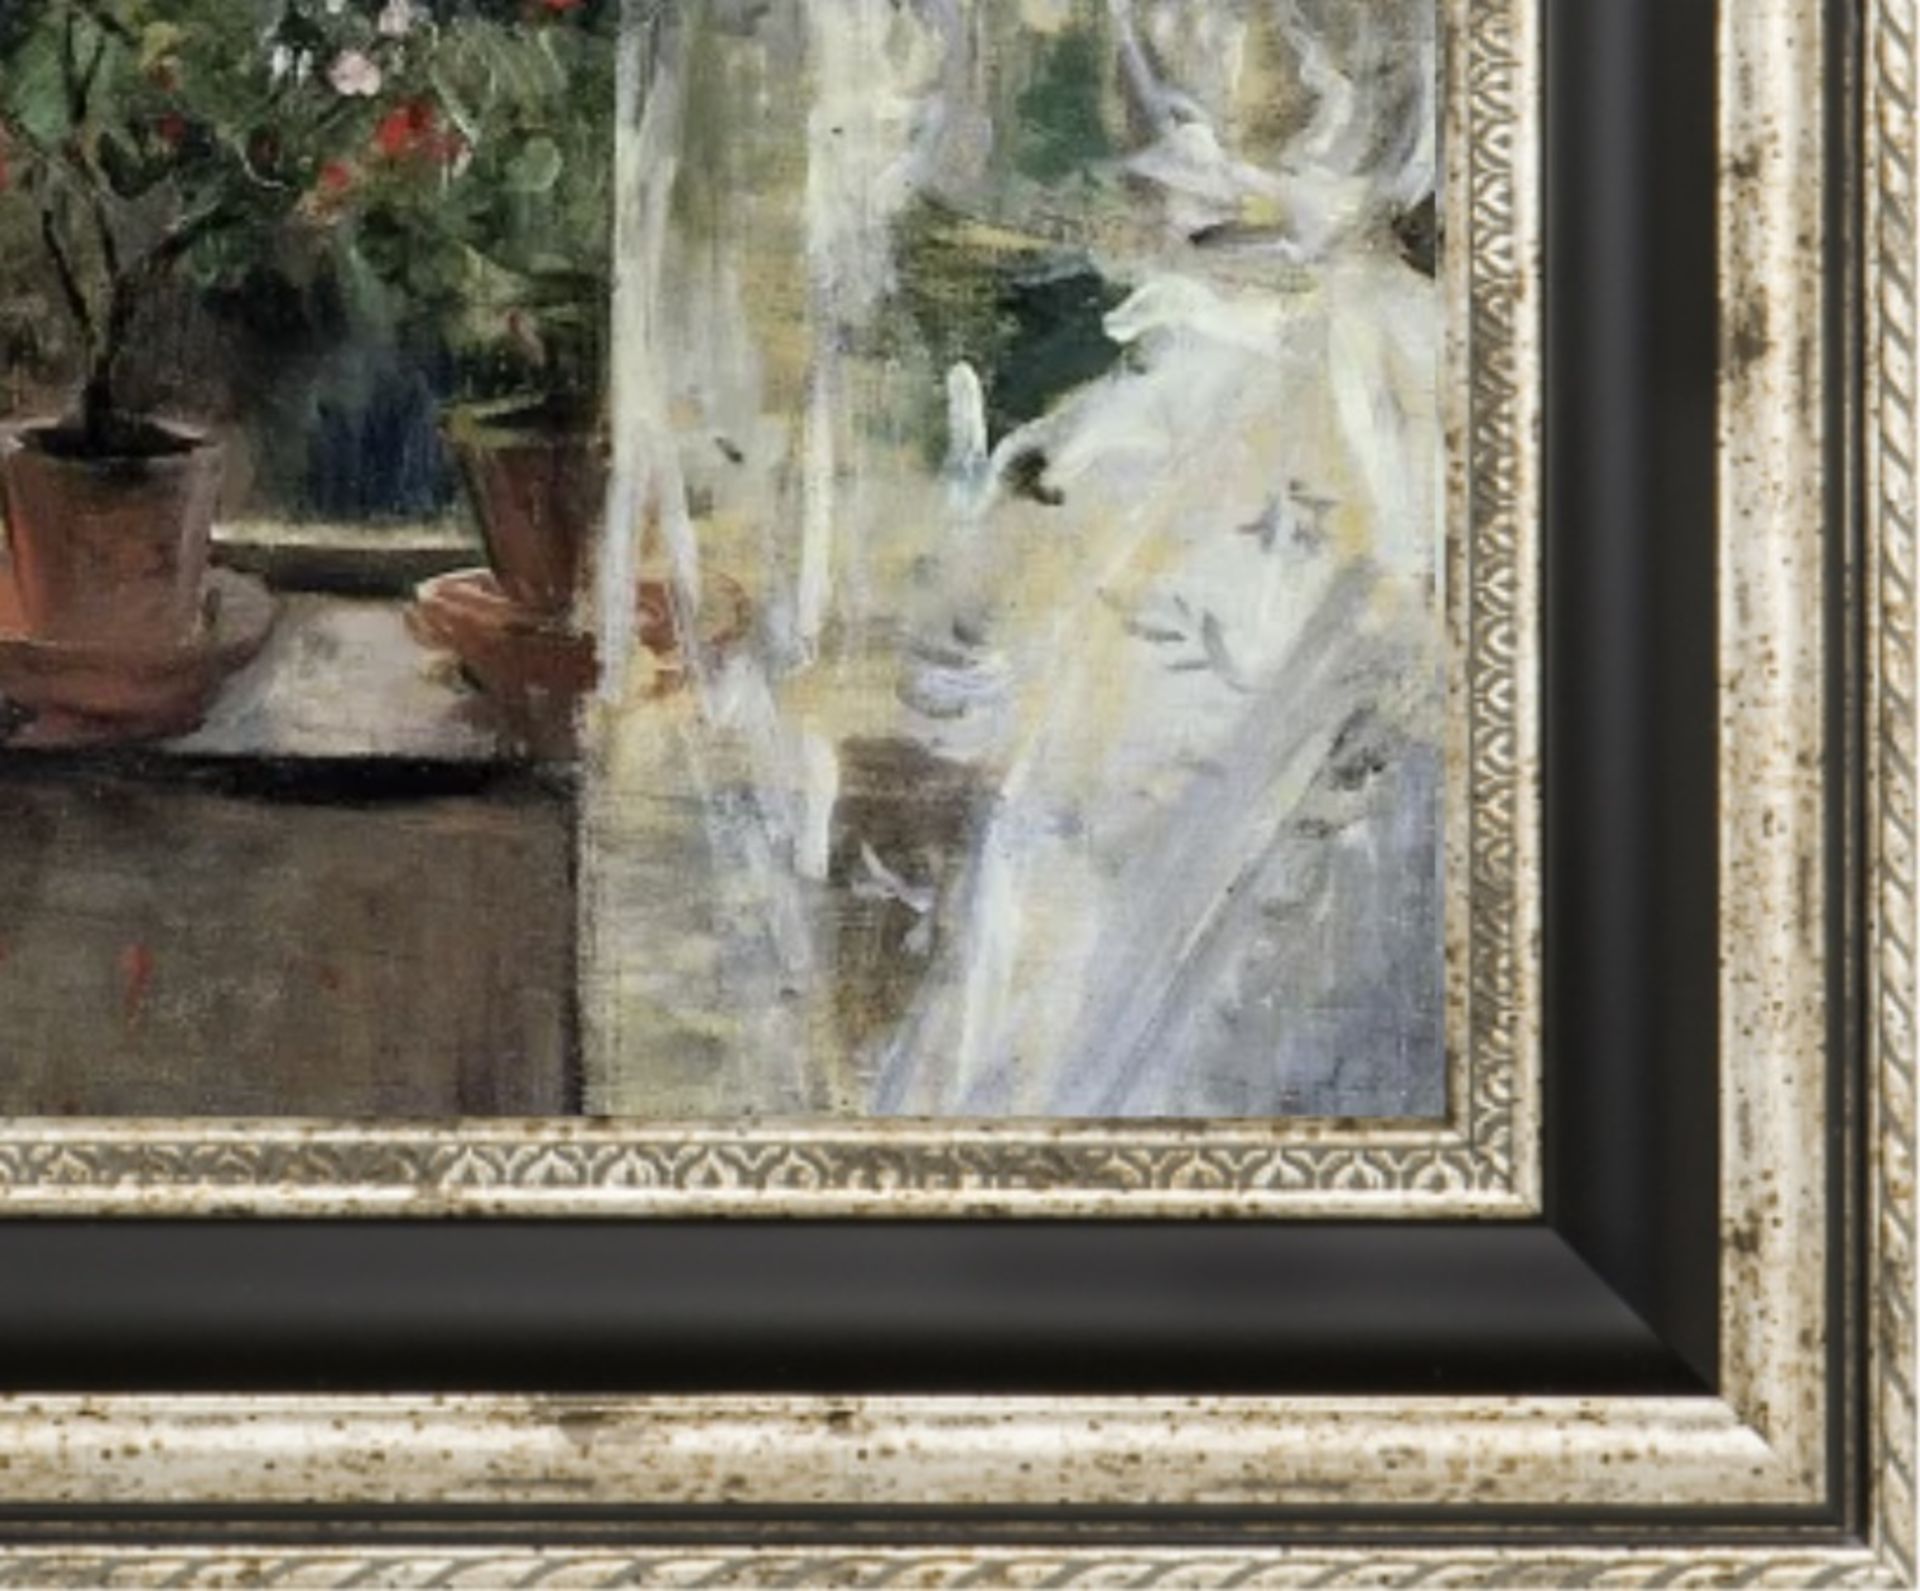 Berthe Morisot "Eugene Manet, Isle of Wight" Oil Painting - Image 2 of 5